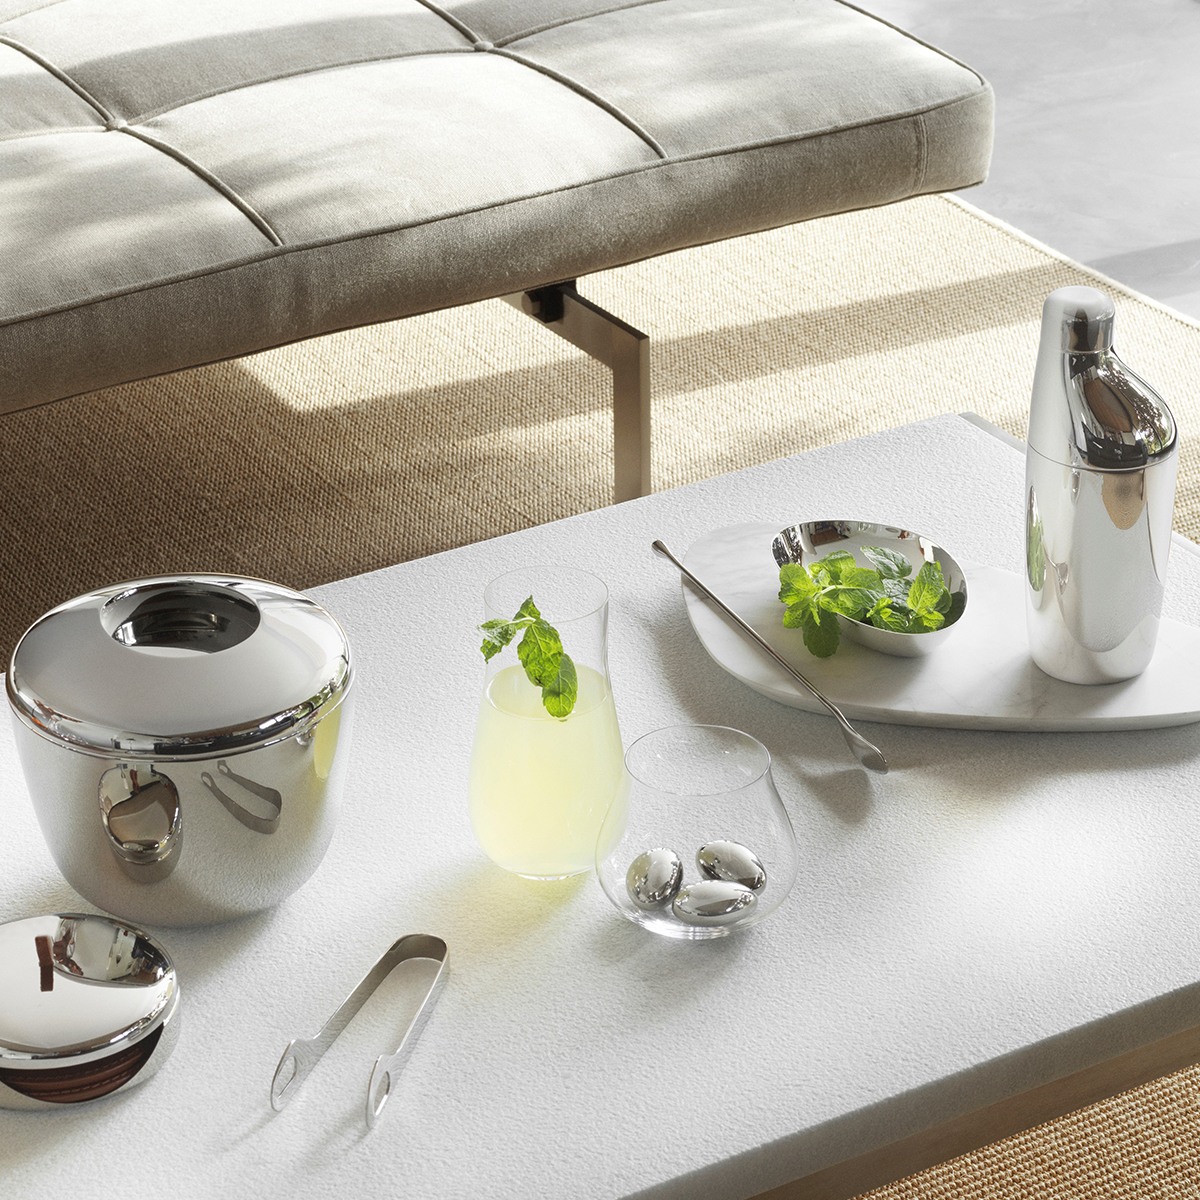 https://res.cloudinary.com/georgjensen/image/upload/f_auto,dpr_2/w_auto,c_scale/products/images/hi-res/10009247-AW19-sky-set-1200x1200?_i=AG